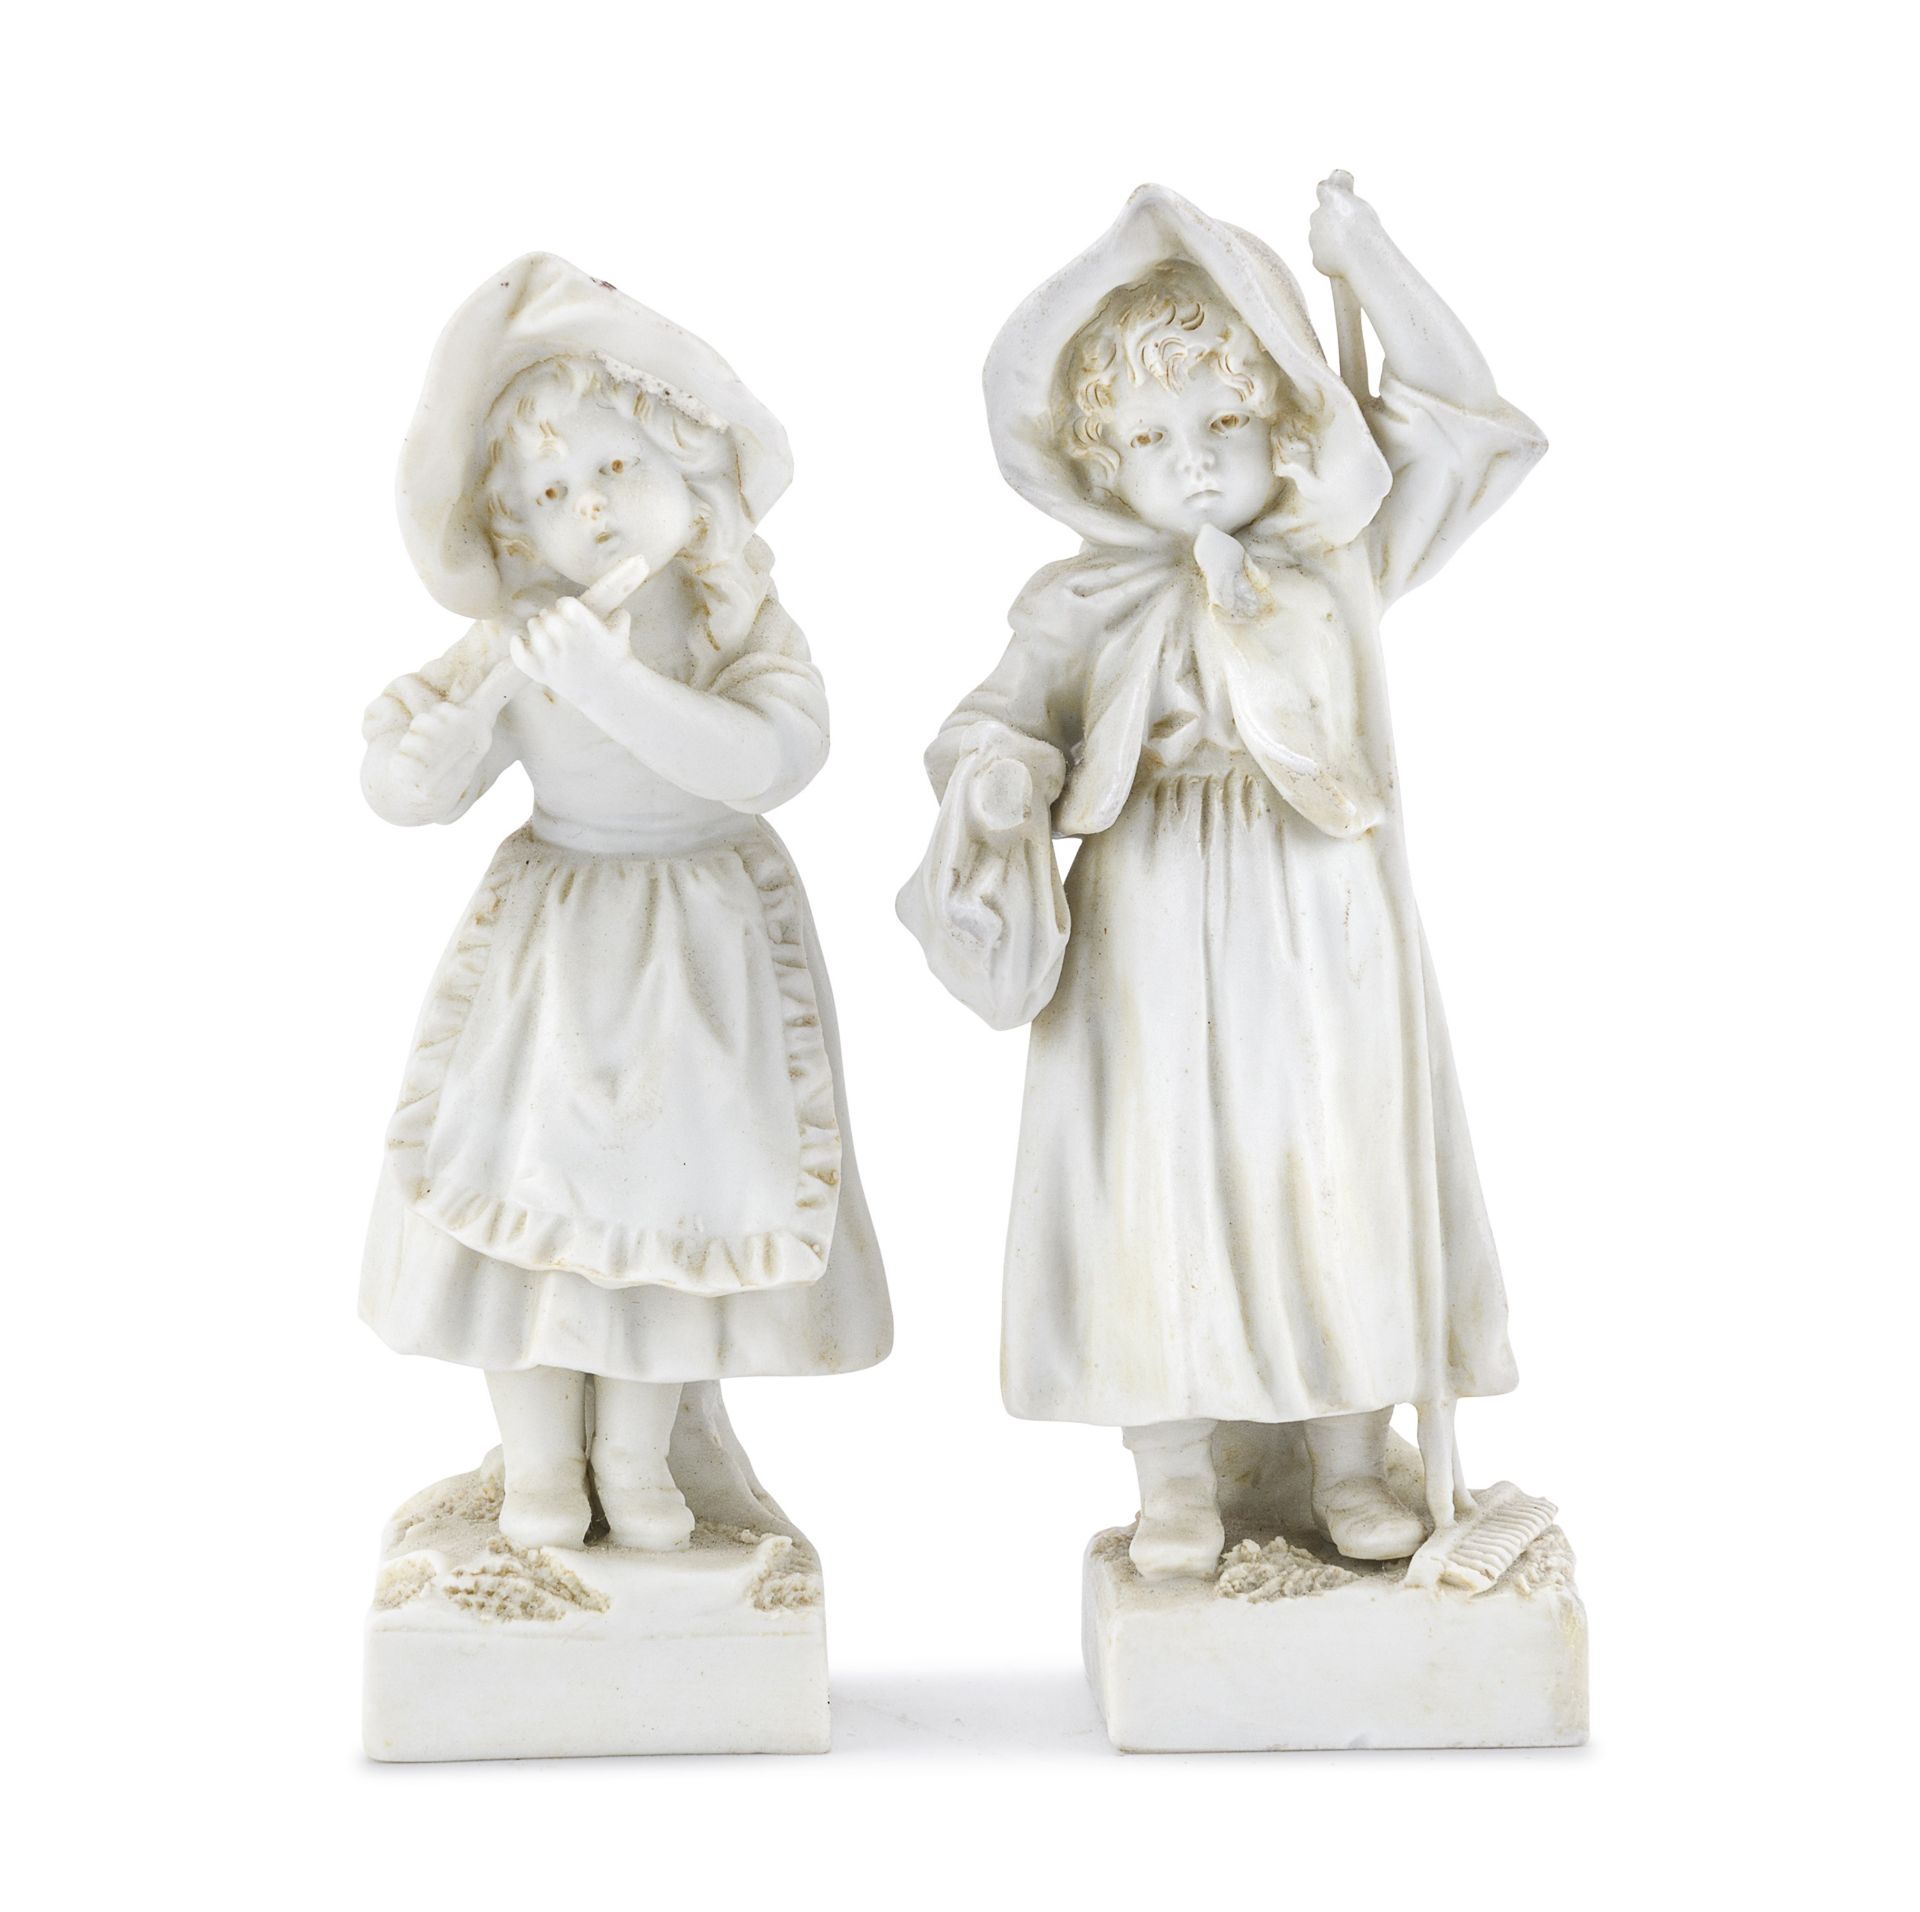 PAIR OF BISCUIT MIGNONETTES GINORI EARLY 20TH CENTURY